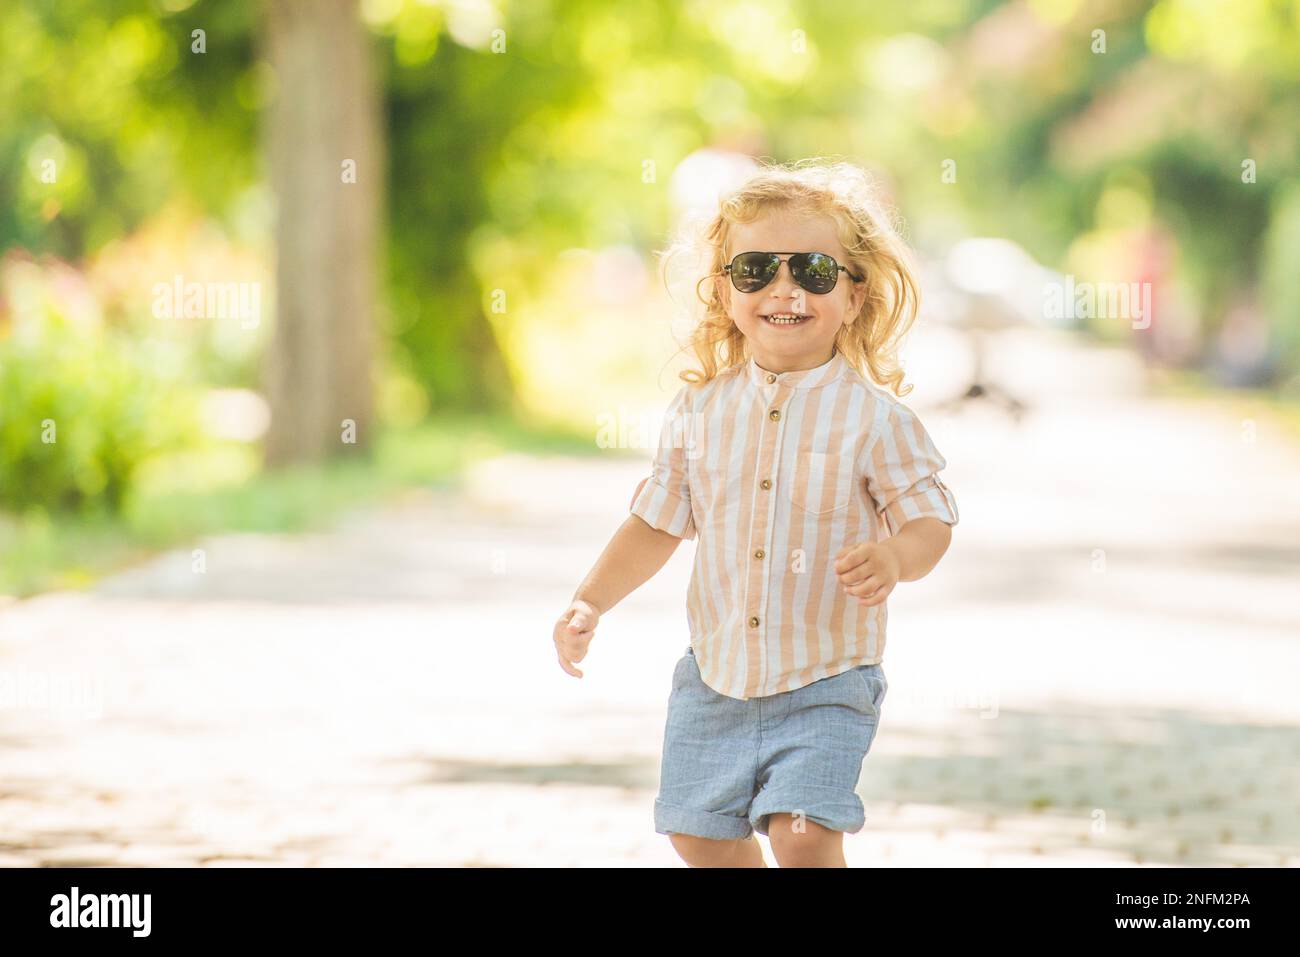 Cute little boy with curly blonde hair playing in park Stock Photo